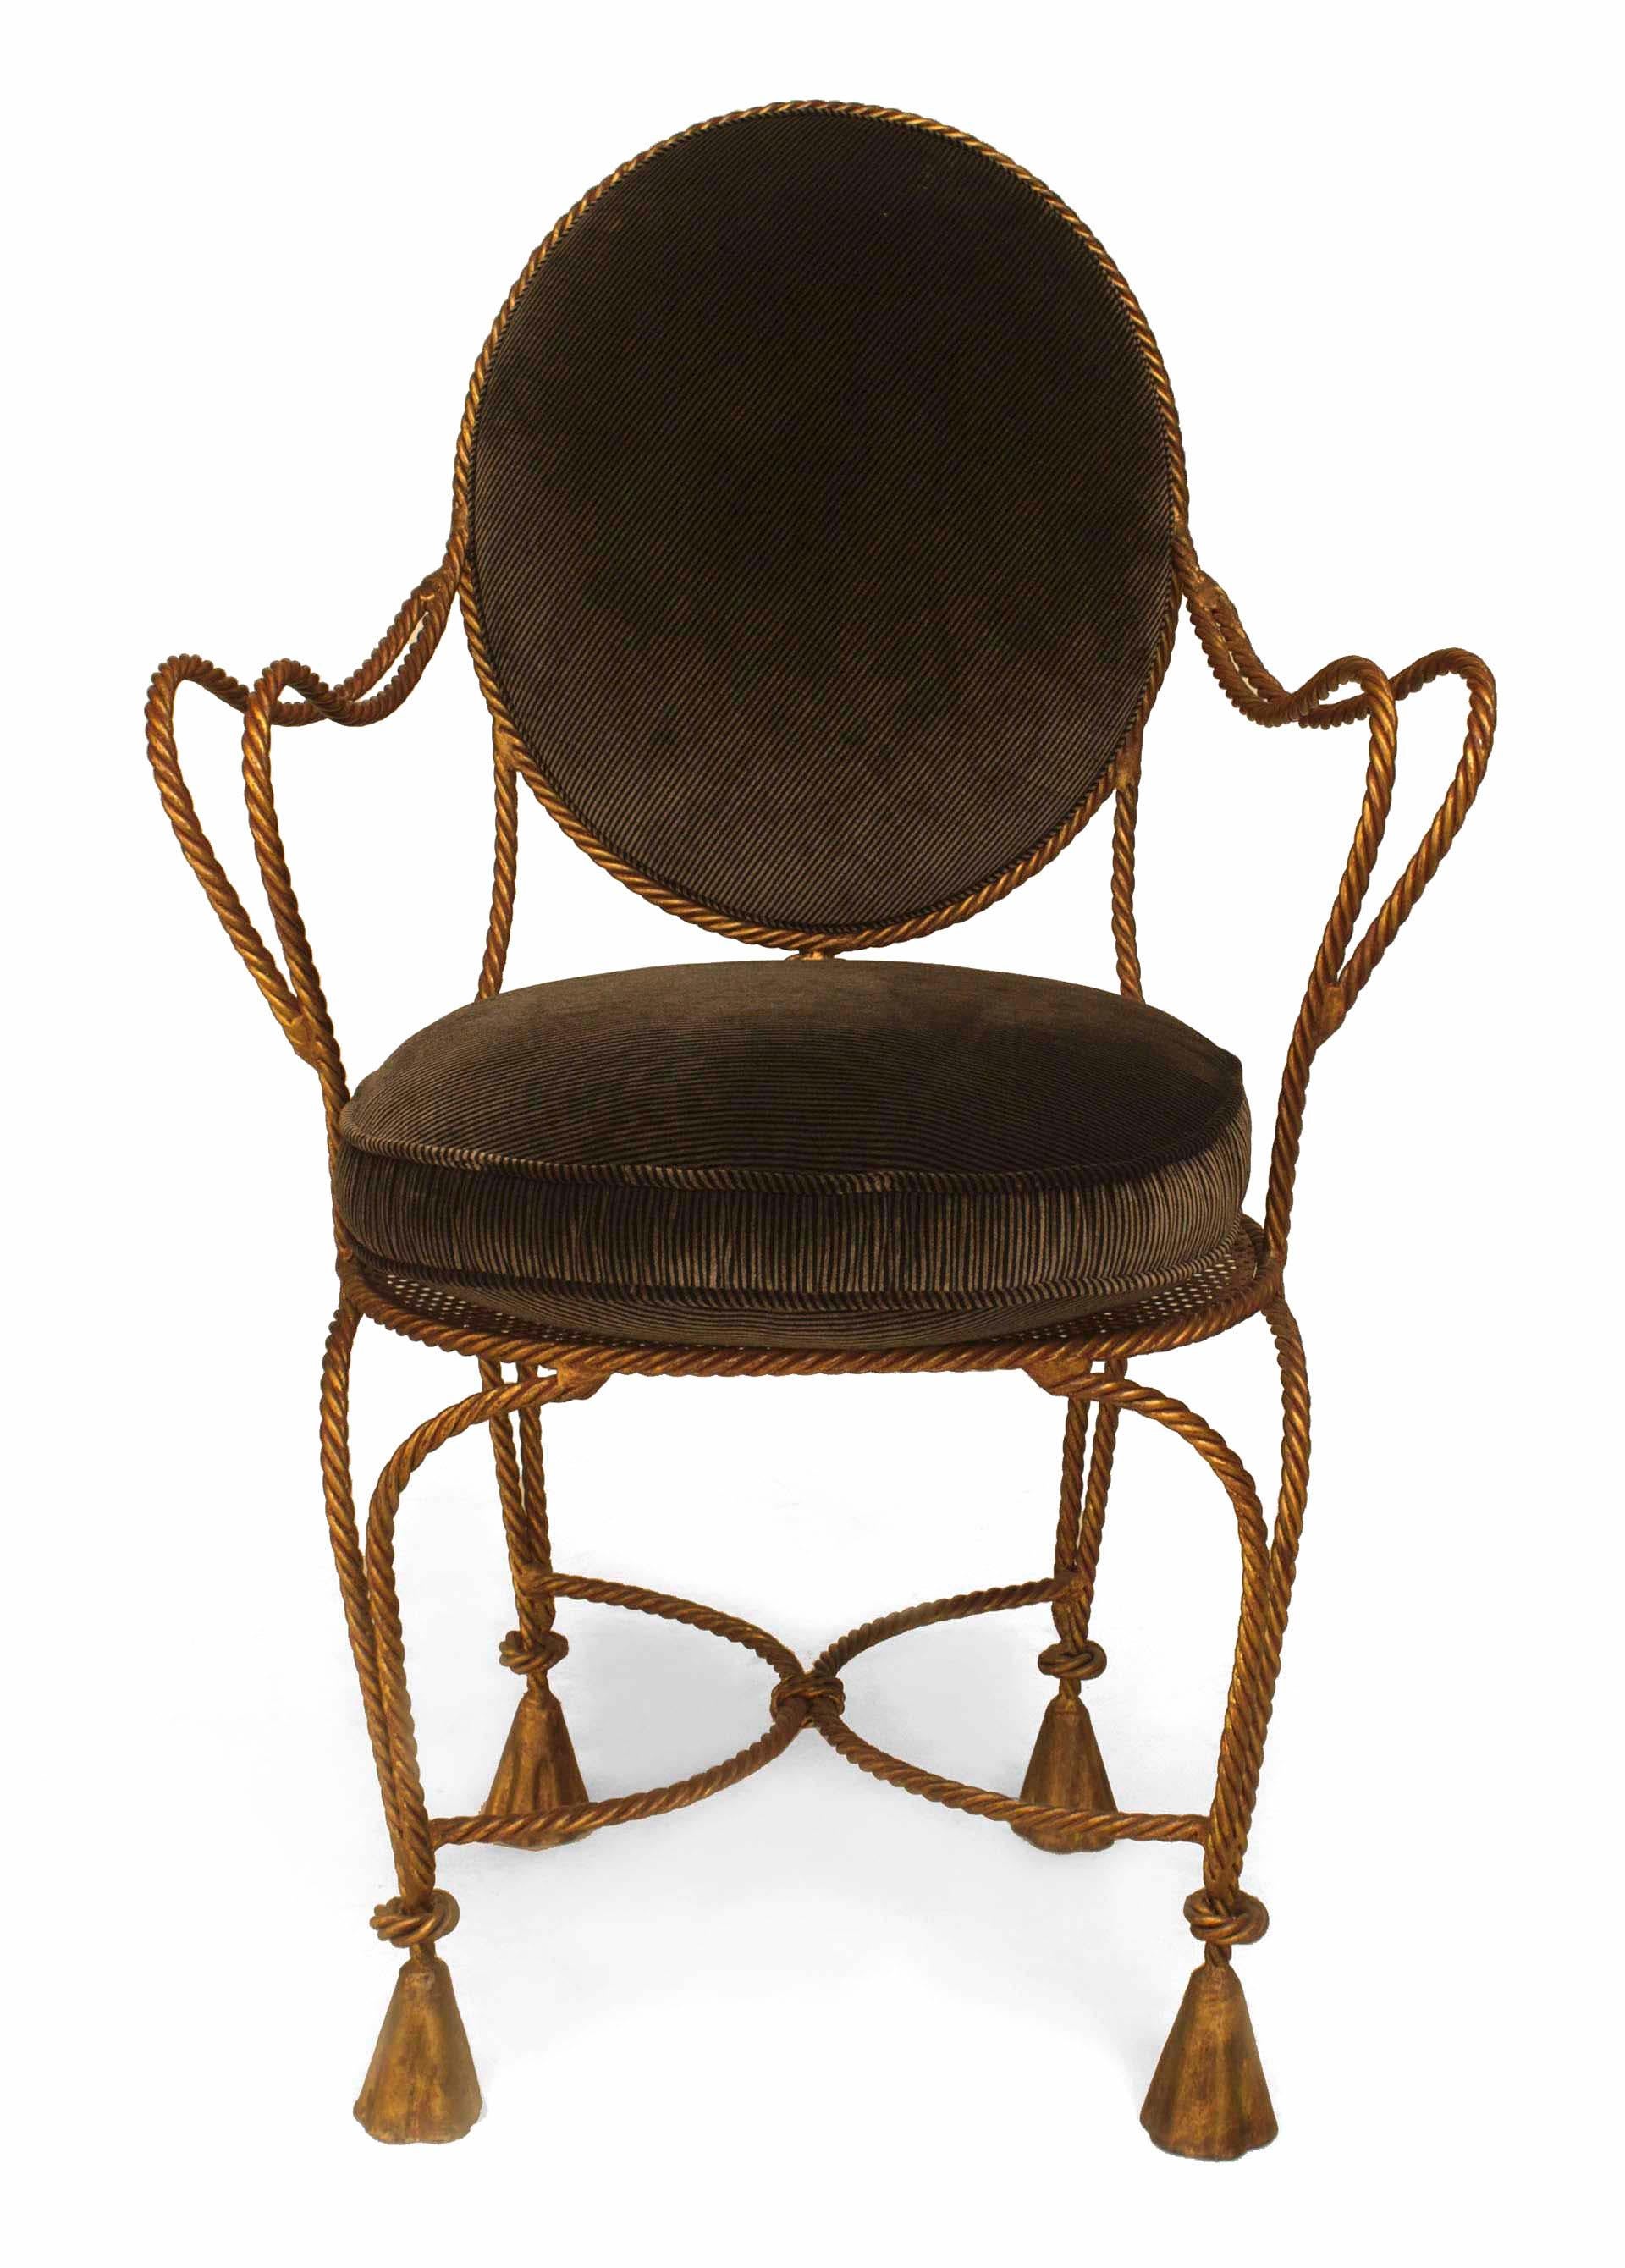 Pair of French 1940s style rope and tassel design gilt metal Armchairs with oval mesh seat and back upholstered in brown stripe.
